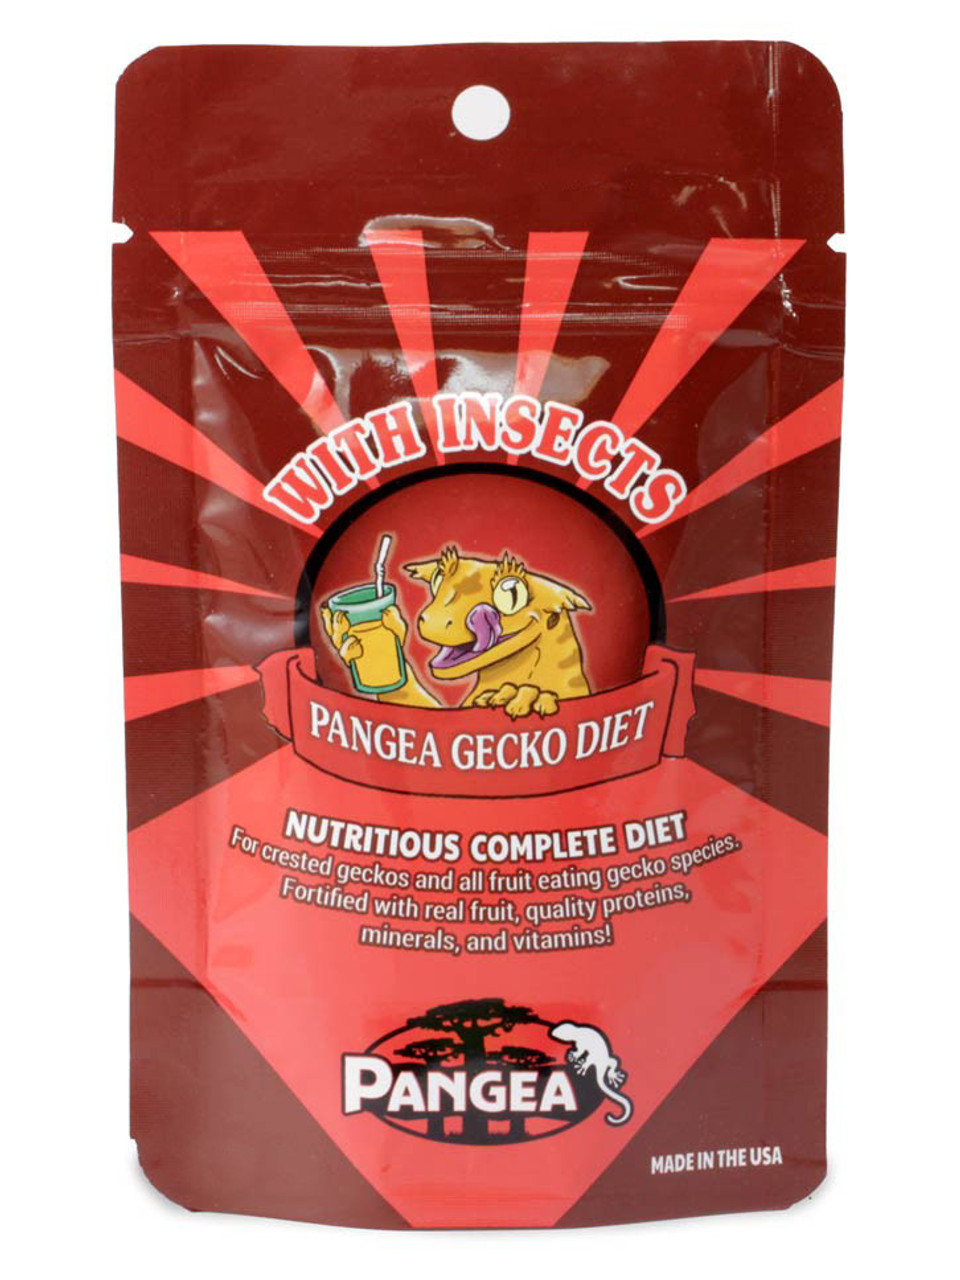 https://cdn11.bigcommerce.com/s-ldfio/images/stencil/1280x1280/products/4301/7347/Pangea_Fruit_Mix_with_Insects_CGD_2oz-8oz__61852.1620667755.jpg?c=2